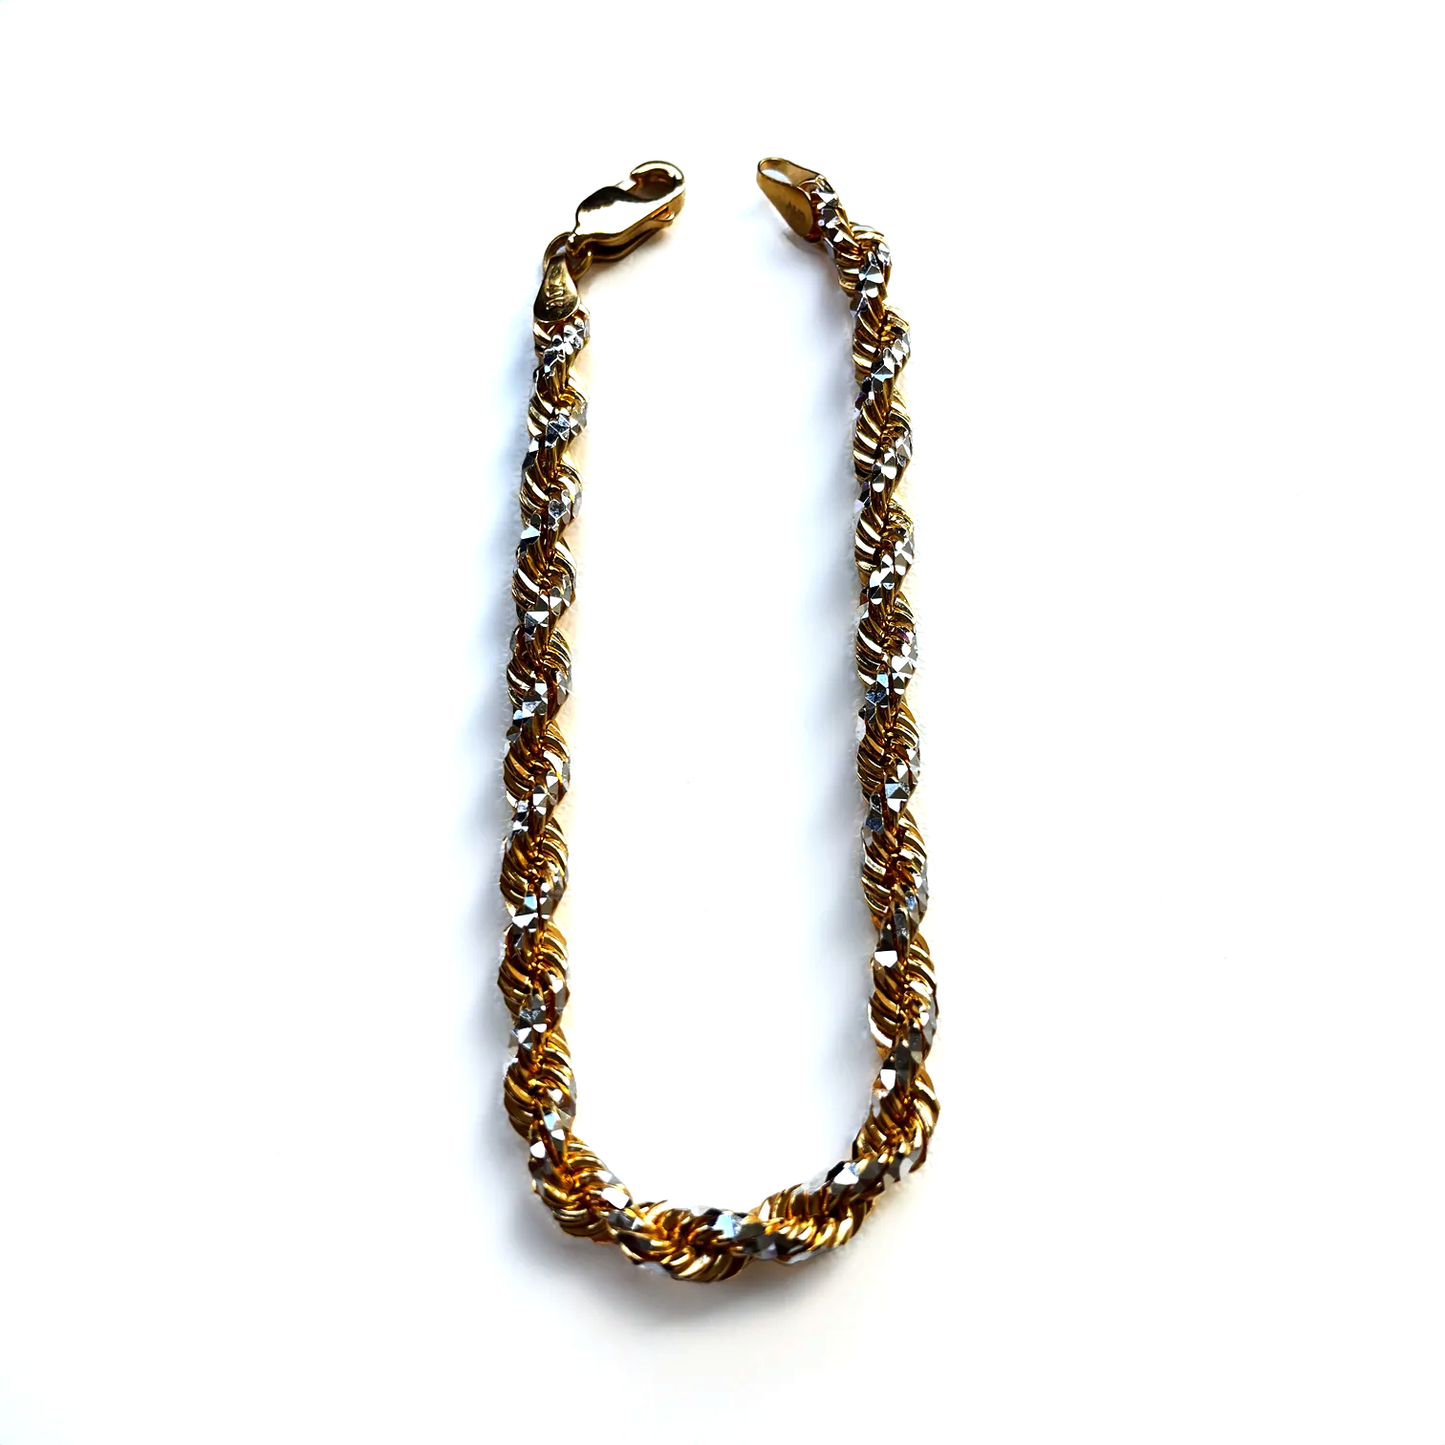 Diamond Cut Rope Bracelet & Necklace in 10KT Two-Tone Gold